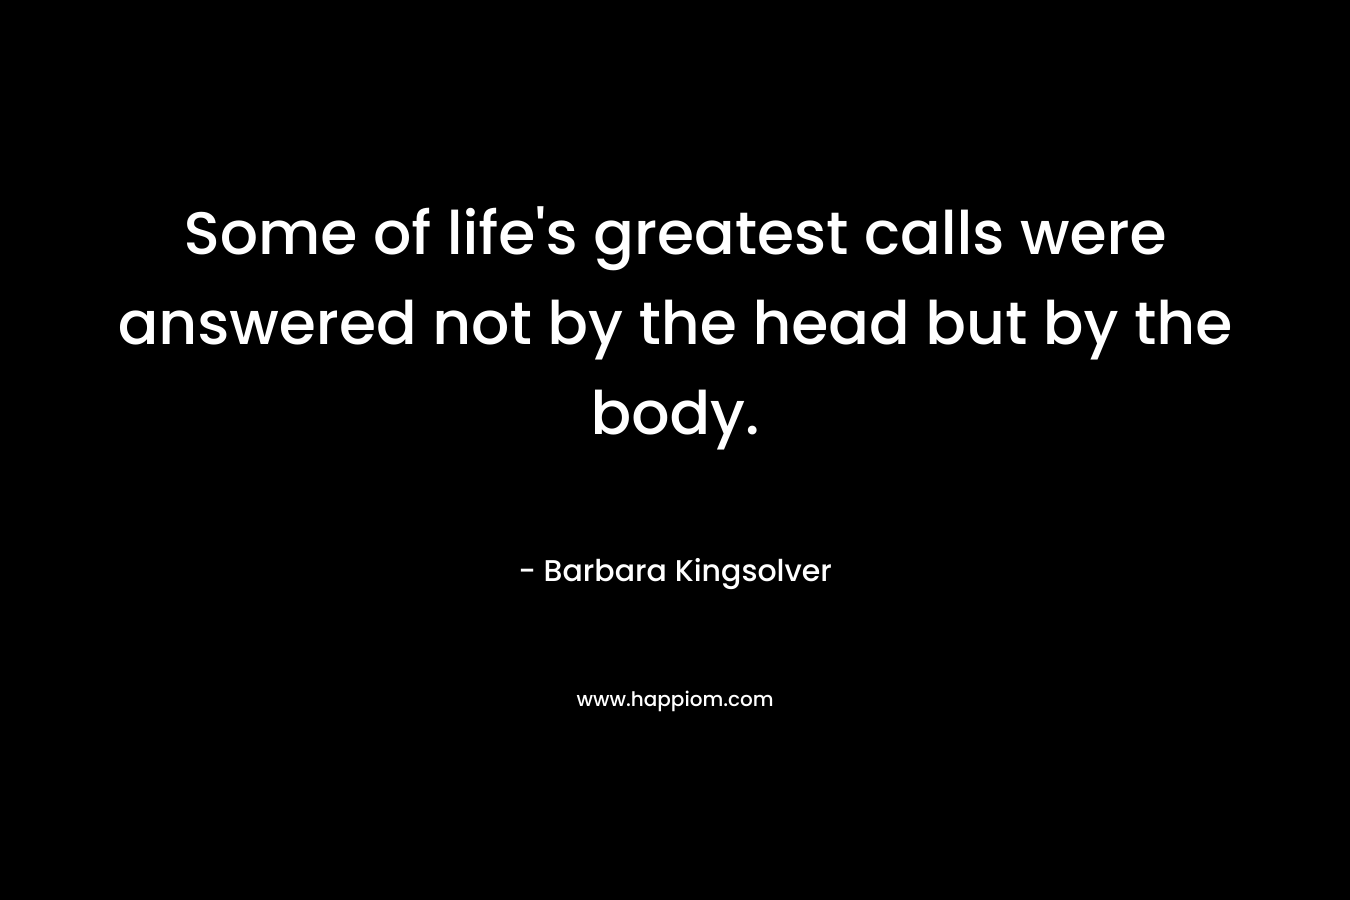 Some of life’s greatest calls were answered not by the head but by the body. – Barbara Kingsolver